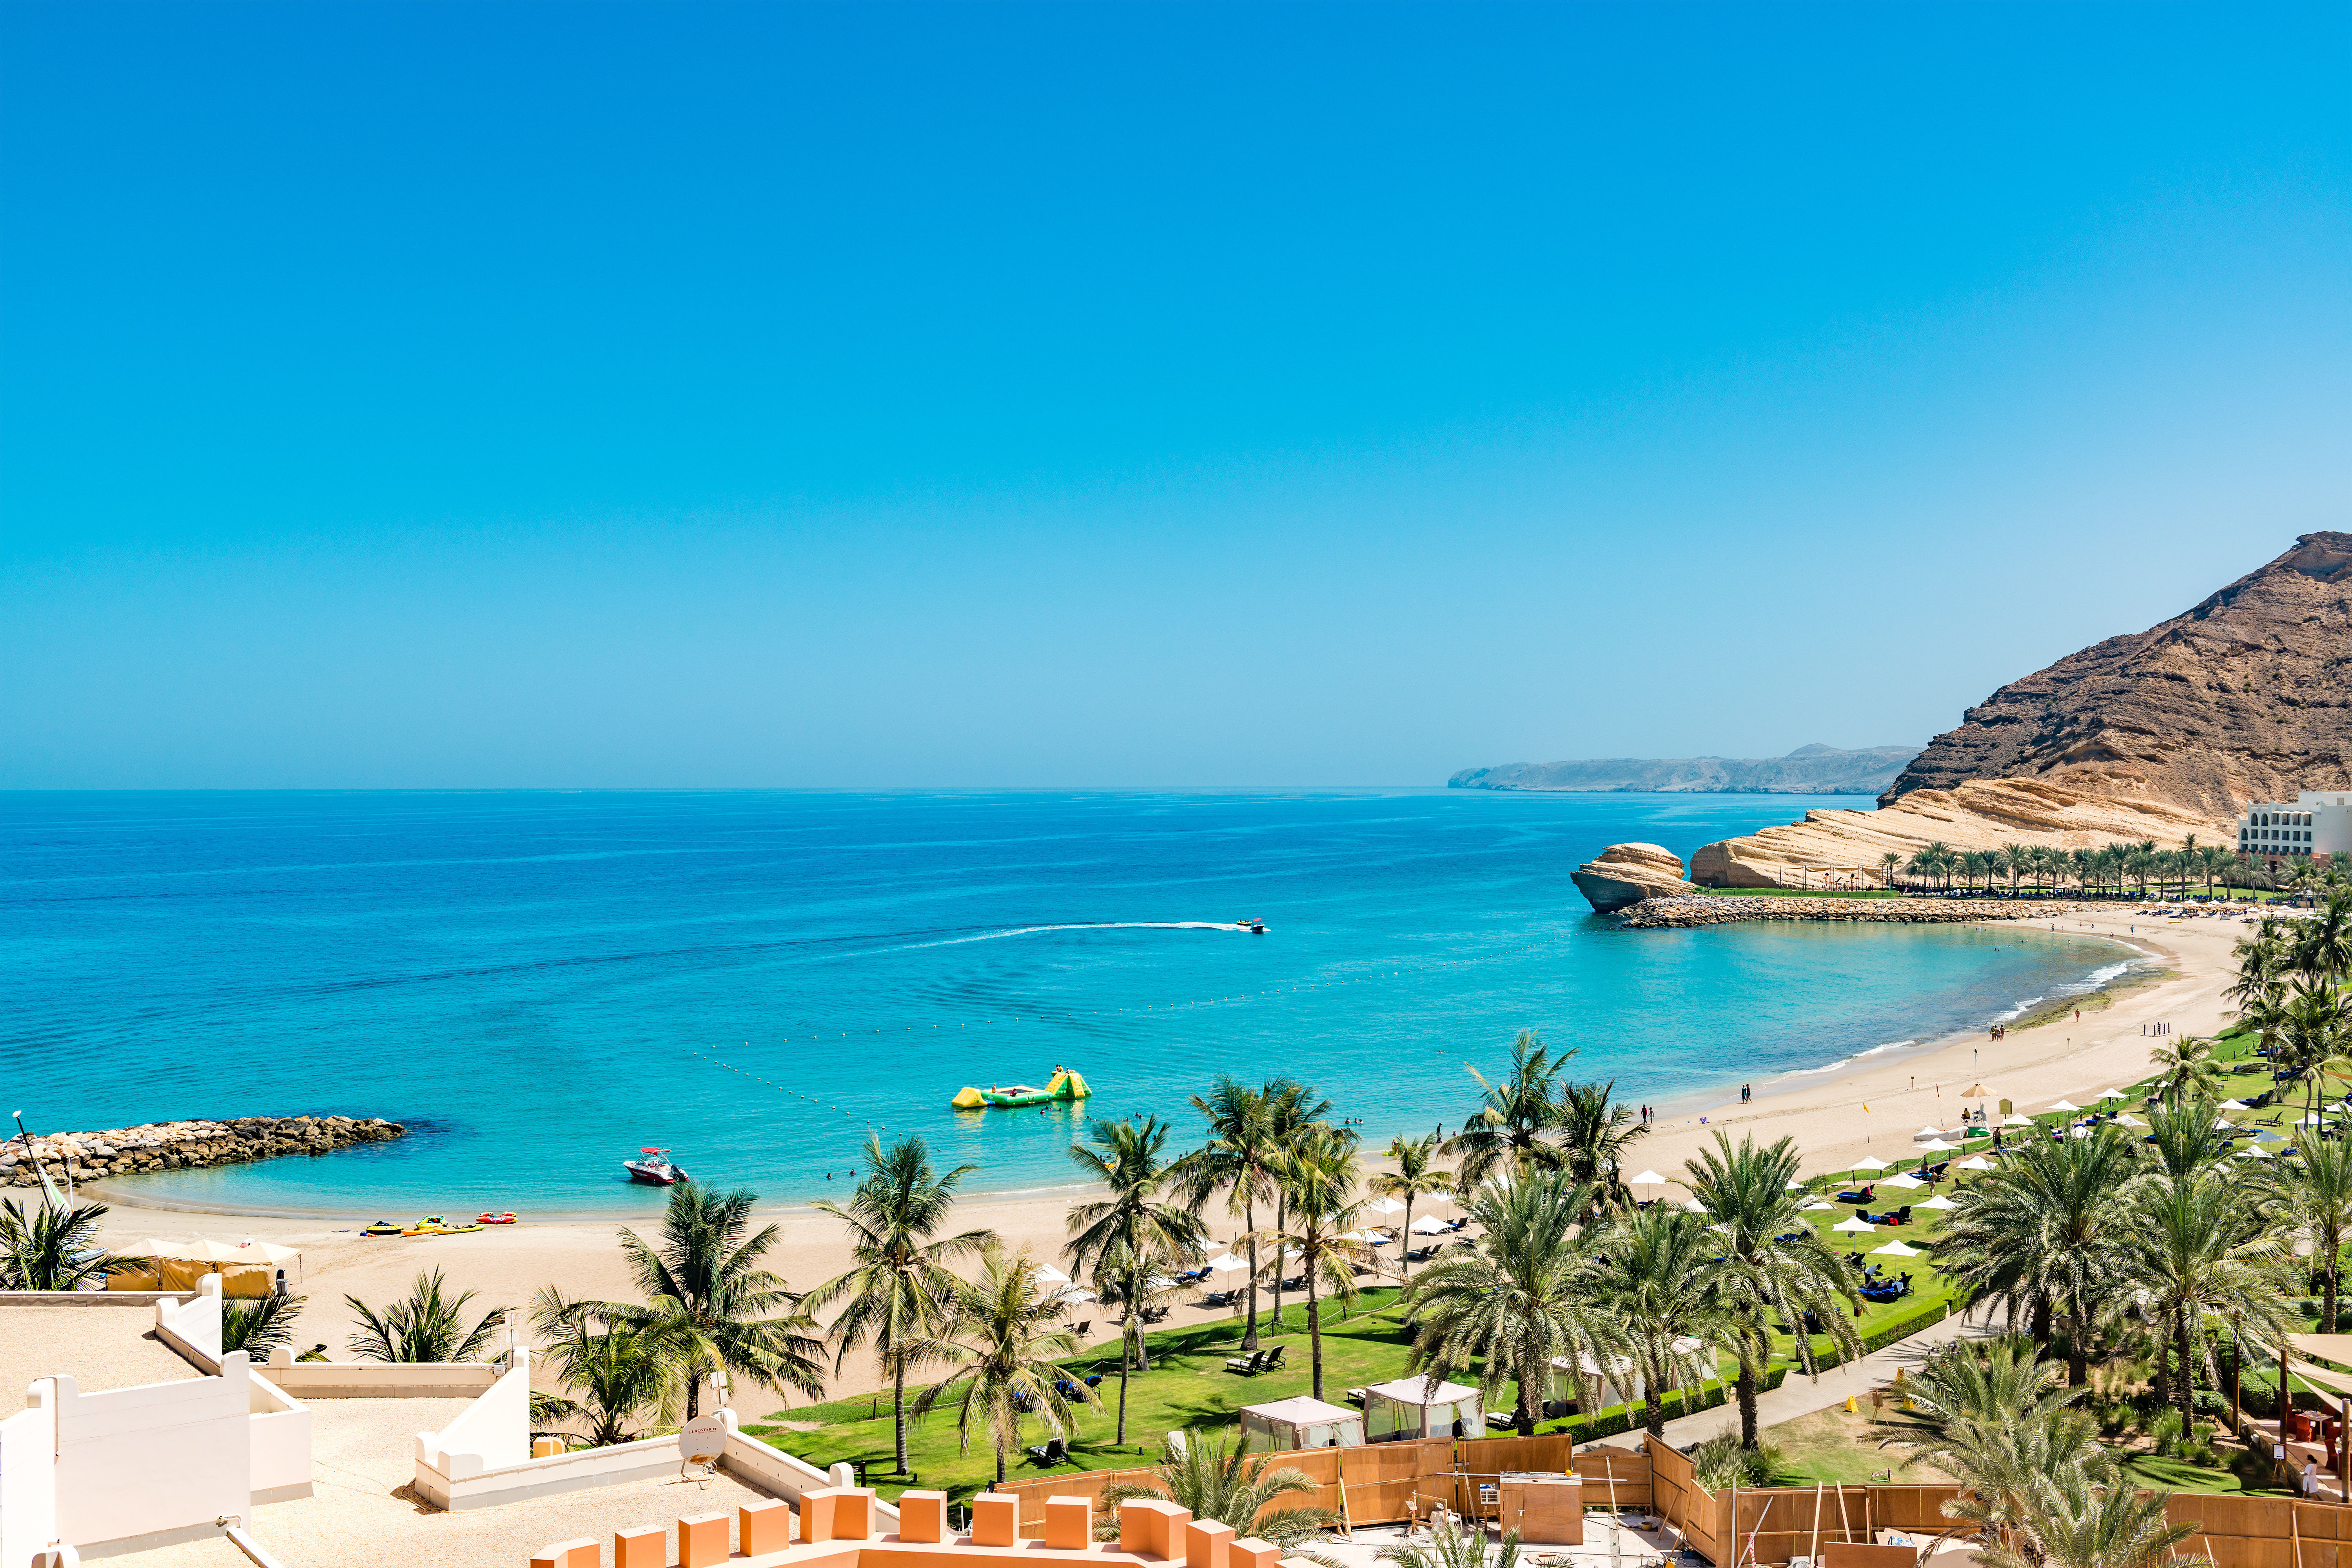 Beautiful golden sand beach with green trees, mountains and blue sea and sky in Oman.